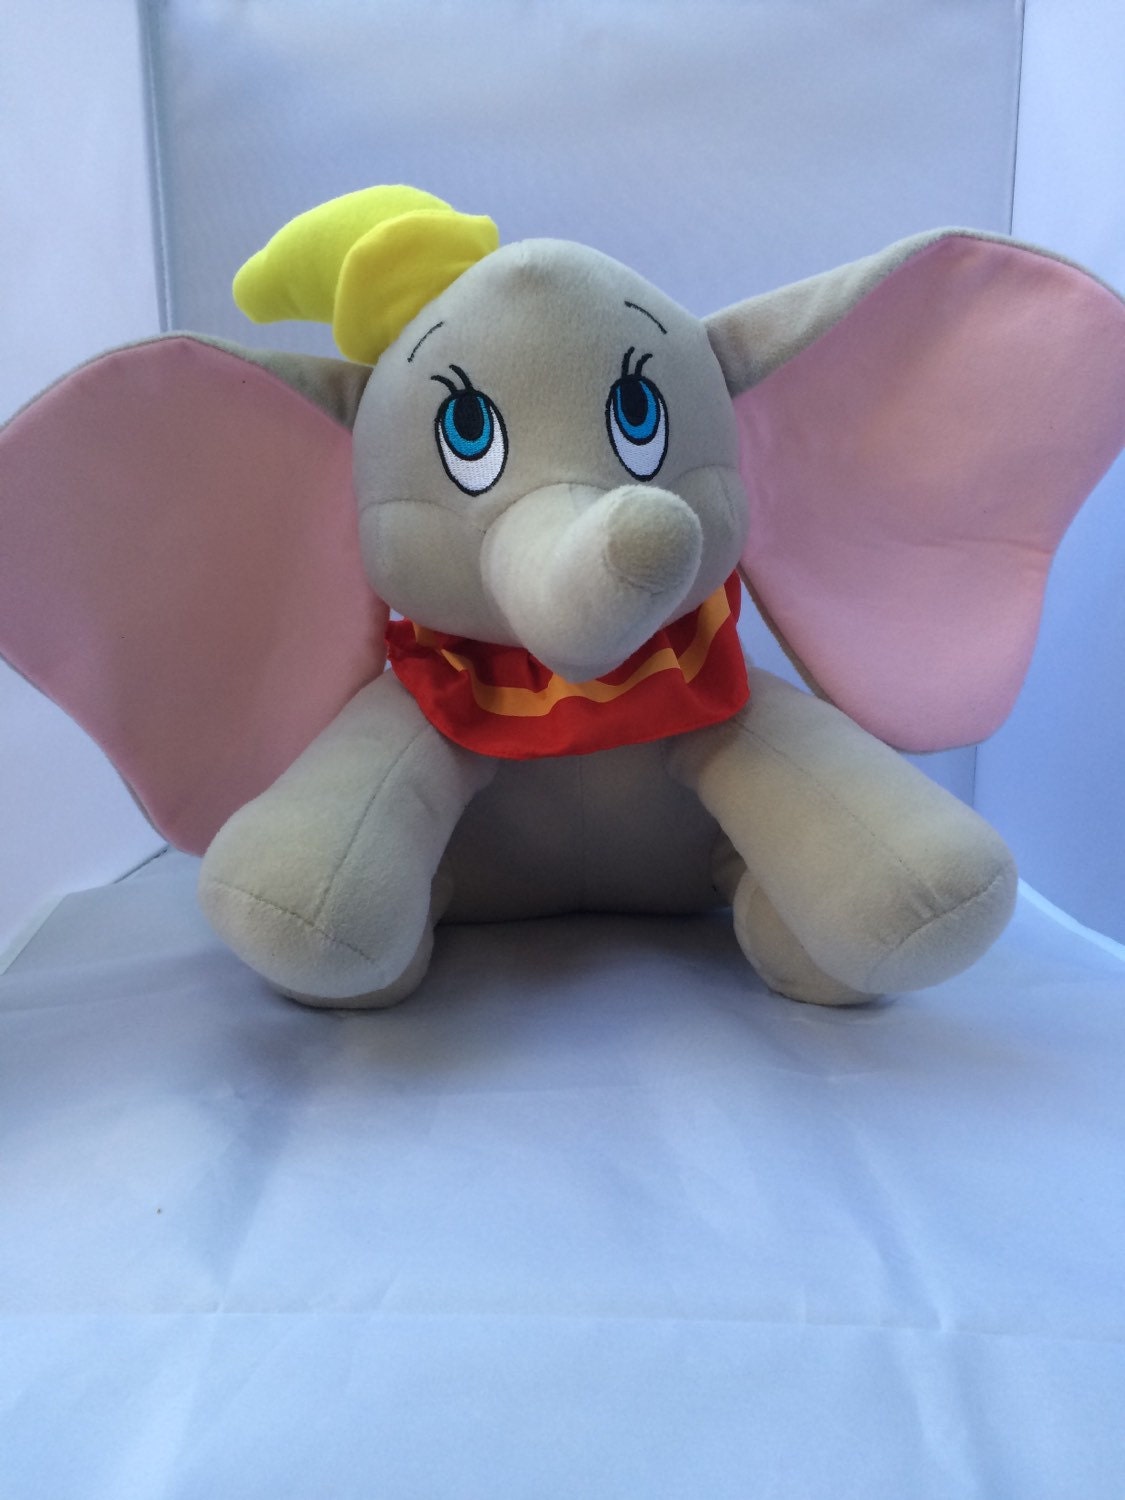 Disney Dumbo Stuffed Toy by LittleQueenieVintage on Etsy